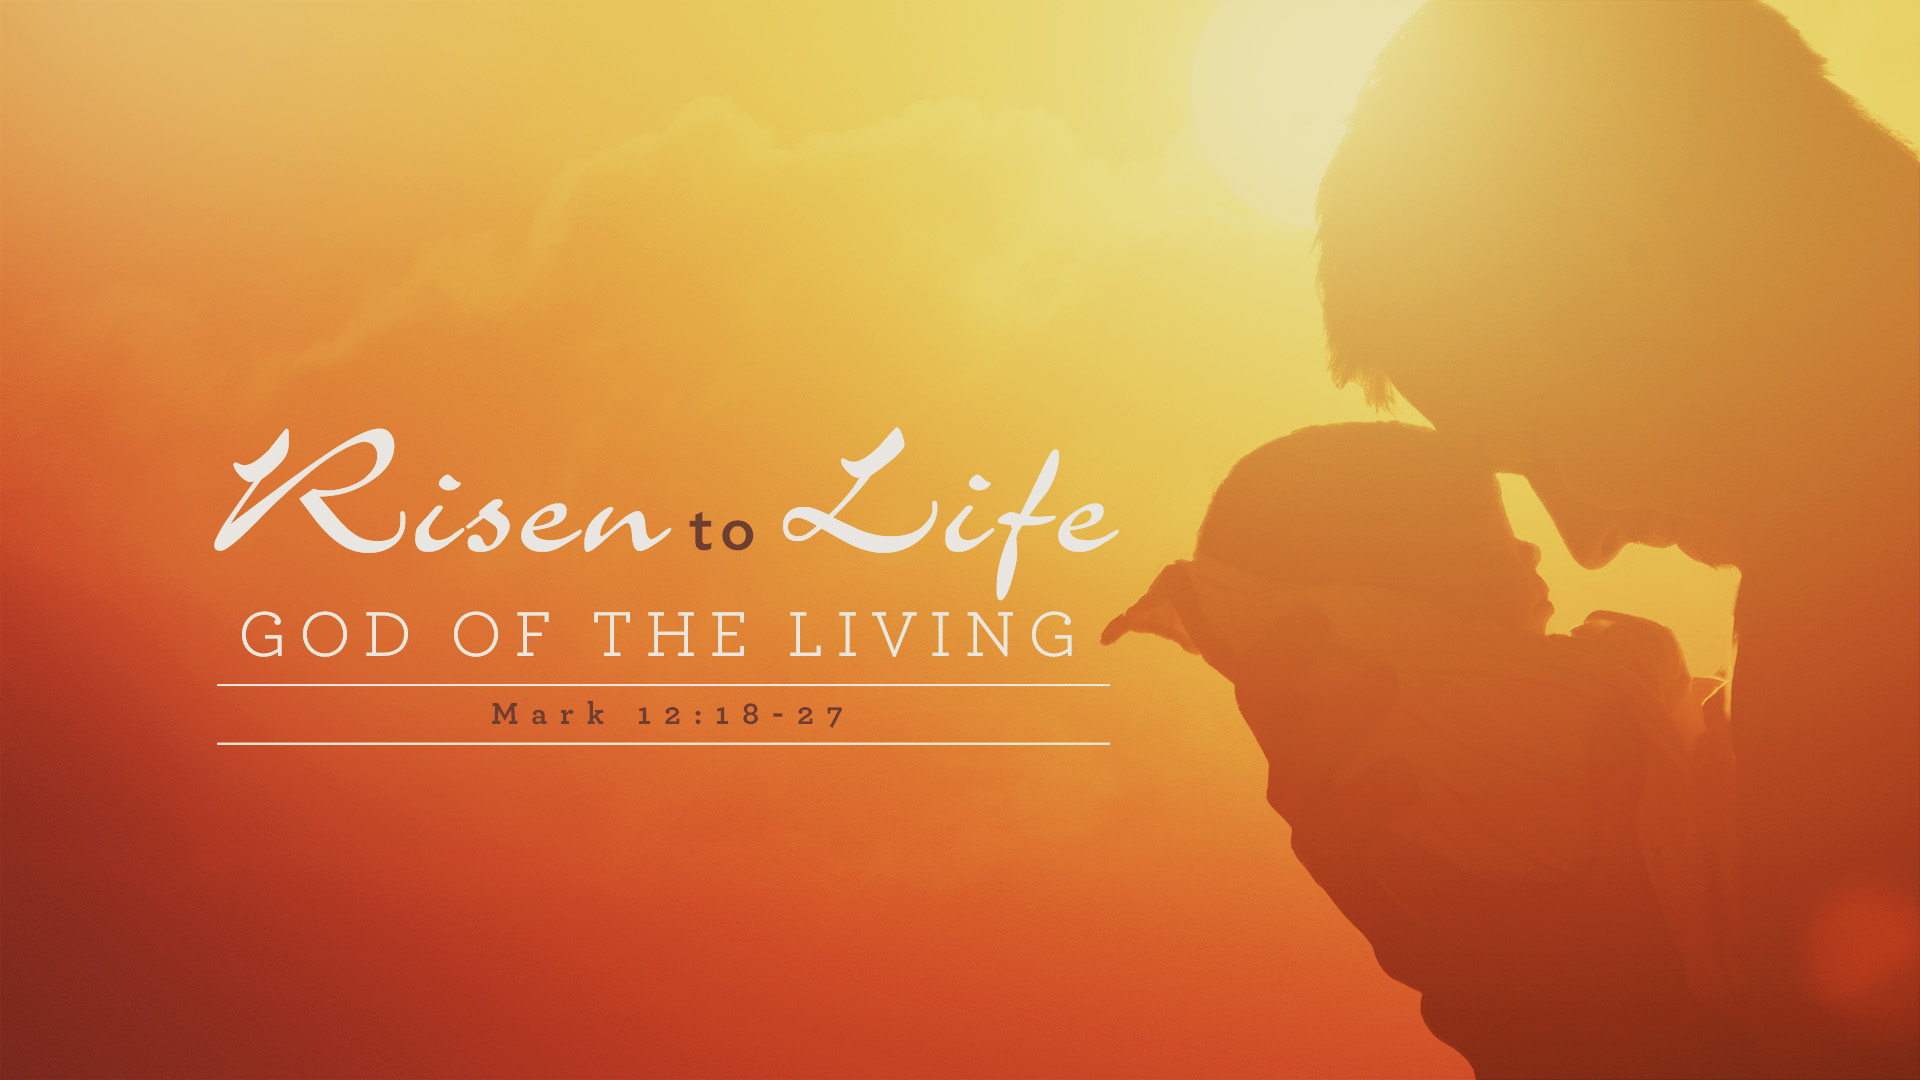 Risen to Life (God of the Living)